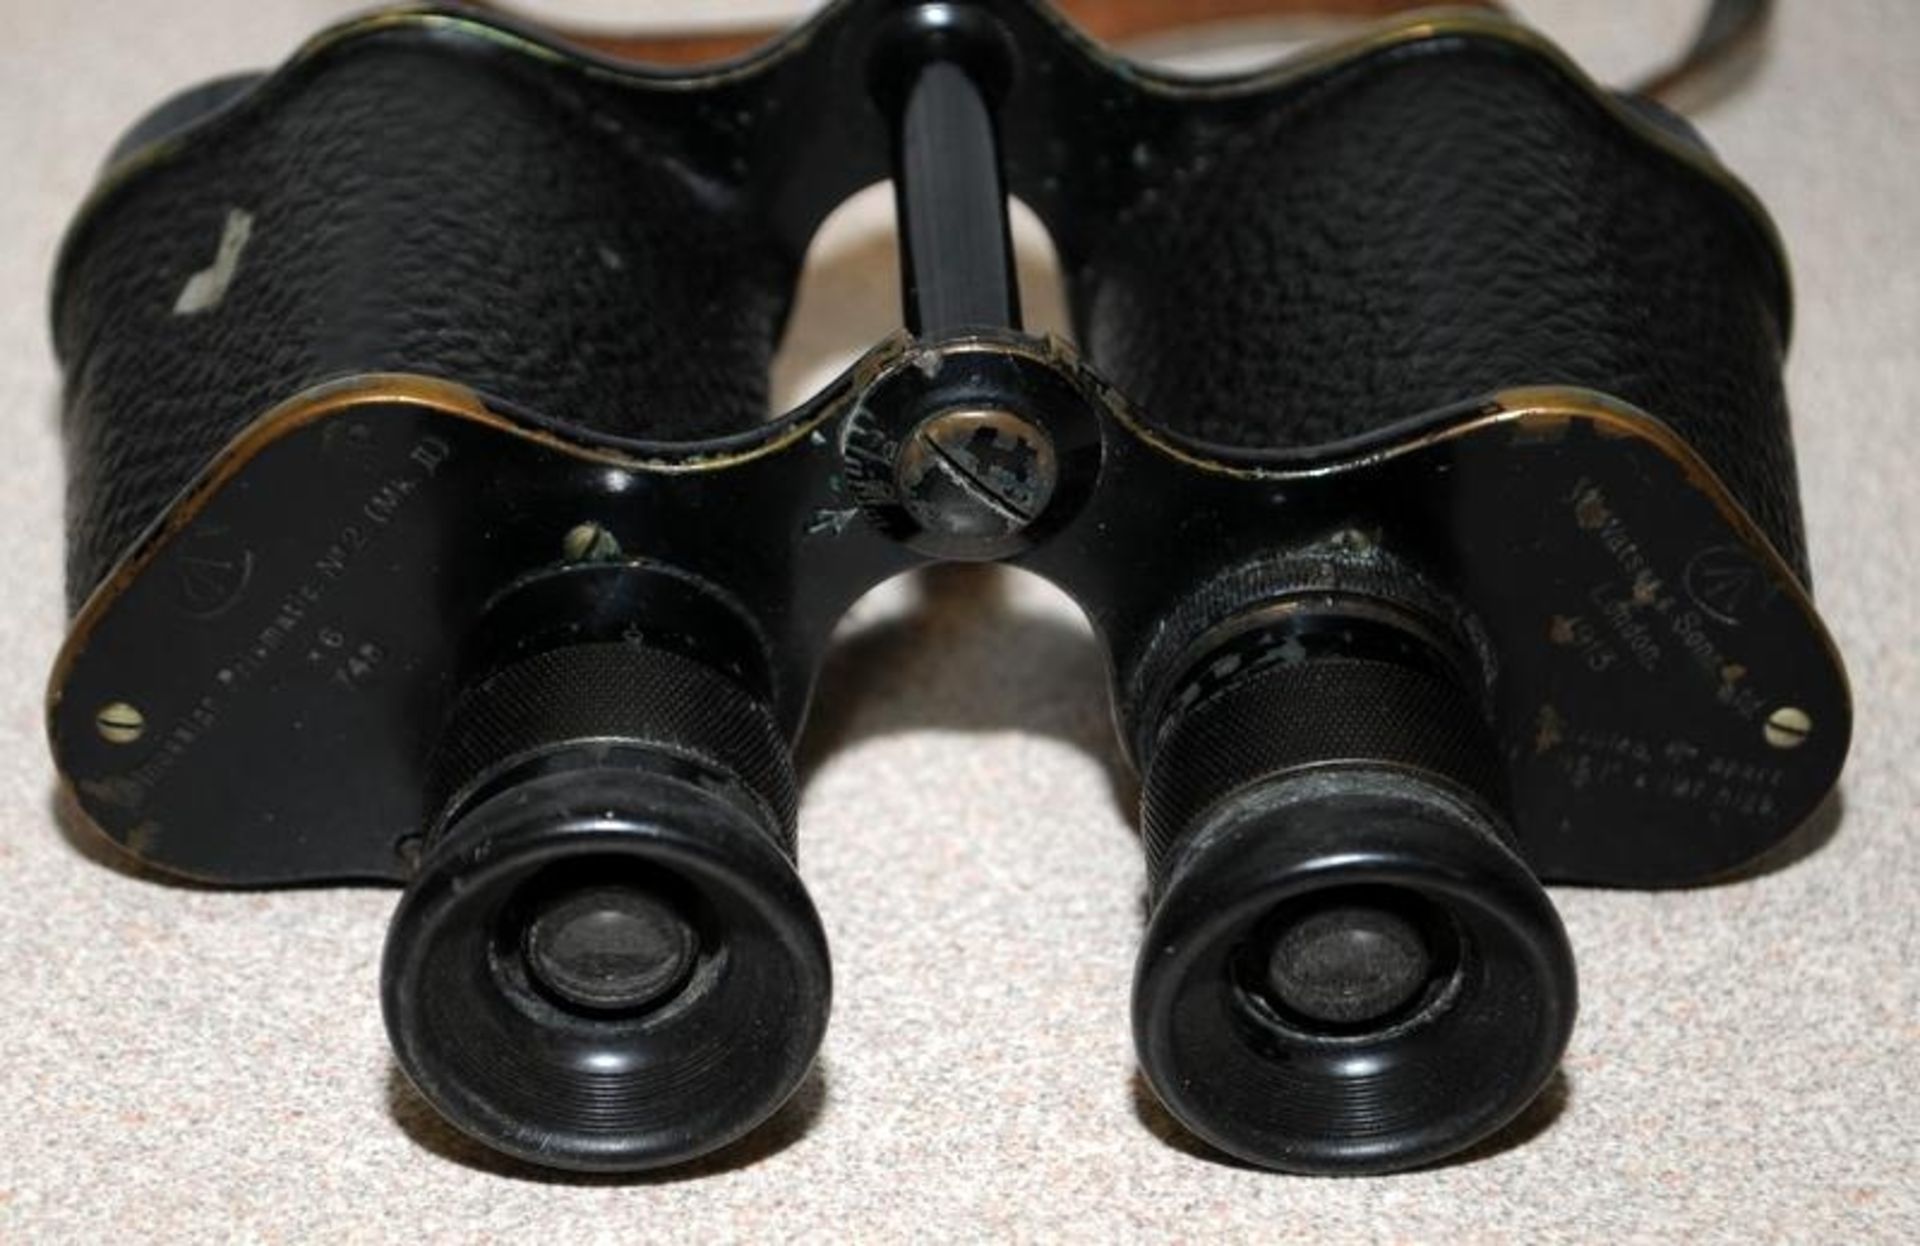 Collection of binoculars including vintage WWII examples. - Image 4 of 6